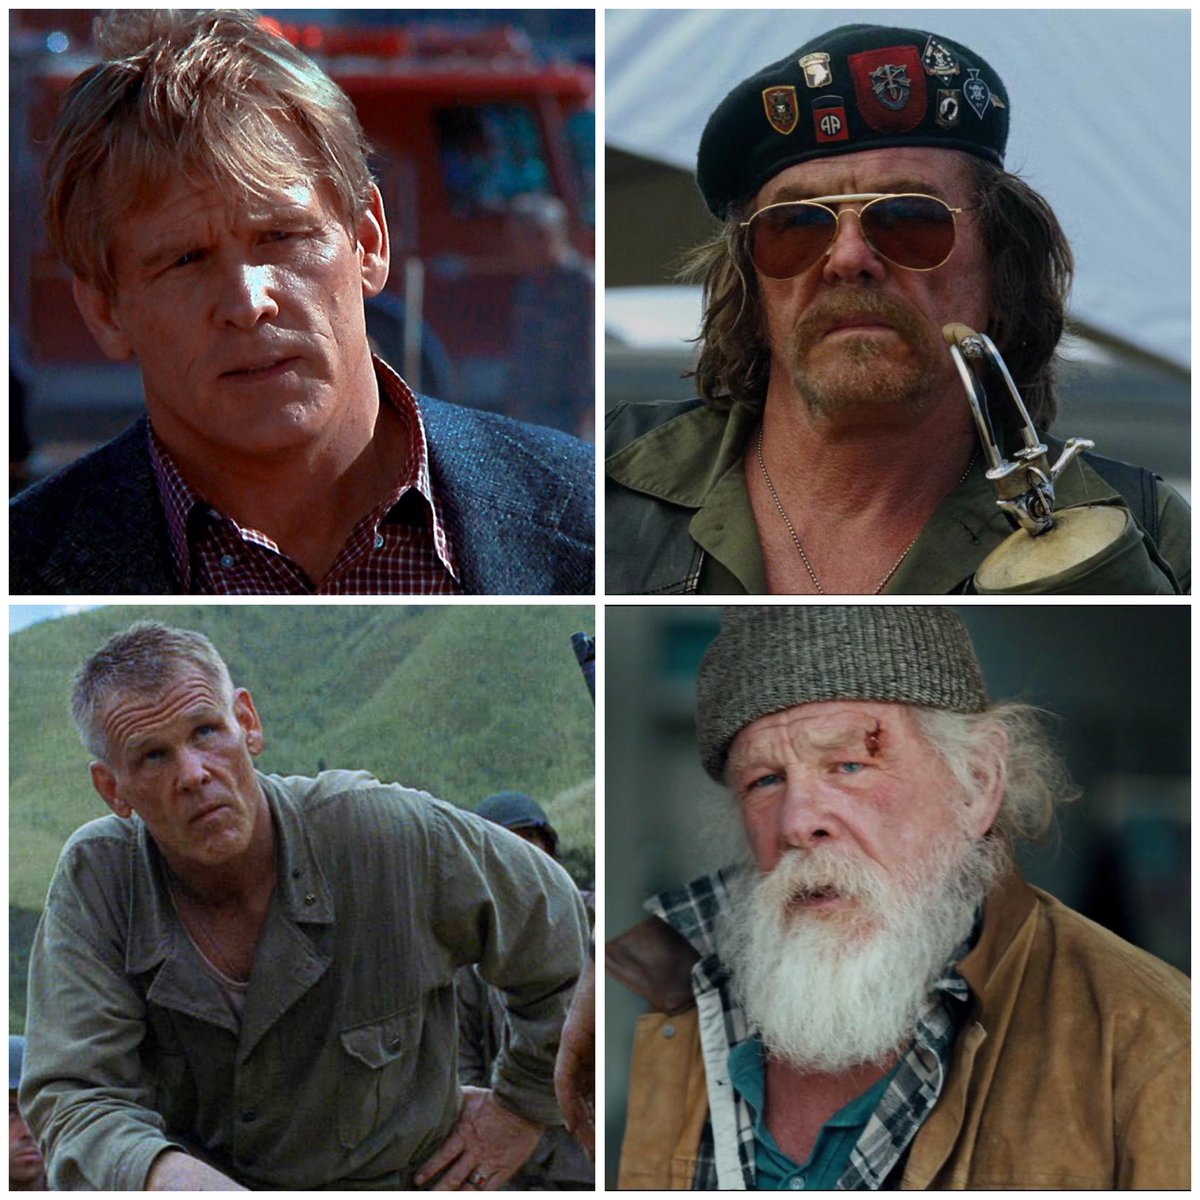 Happy birthday to Nick Nolte🎂 

The actor turns 83 today.

#NickNolte